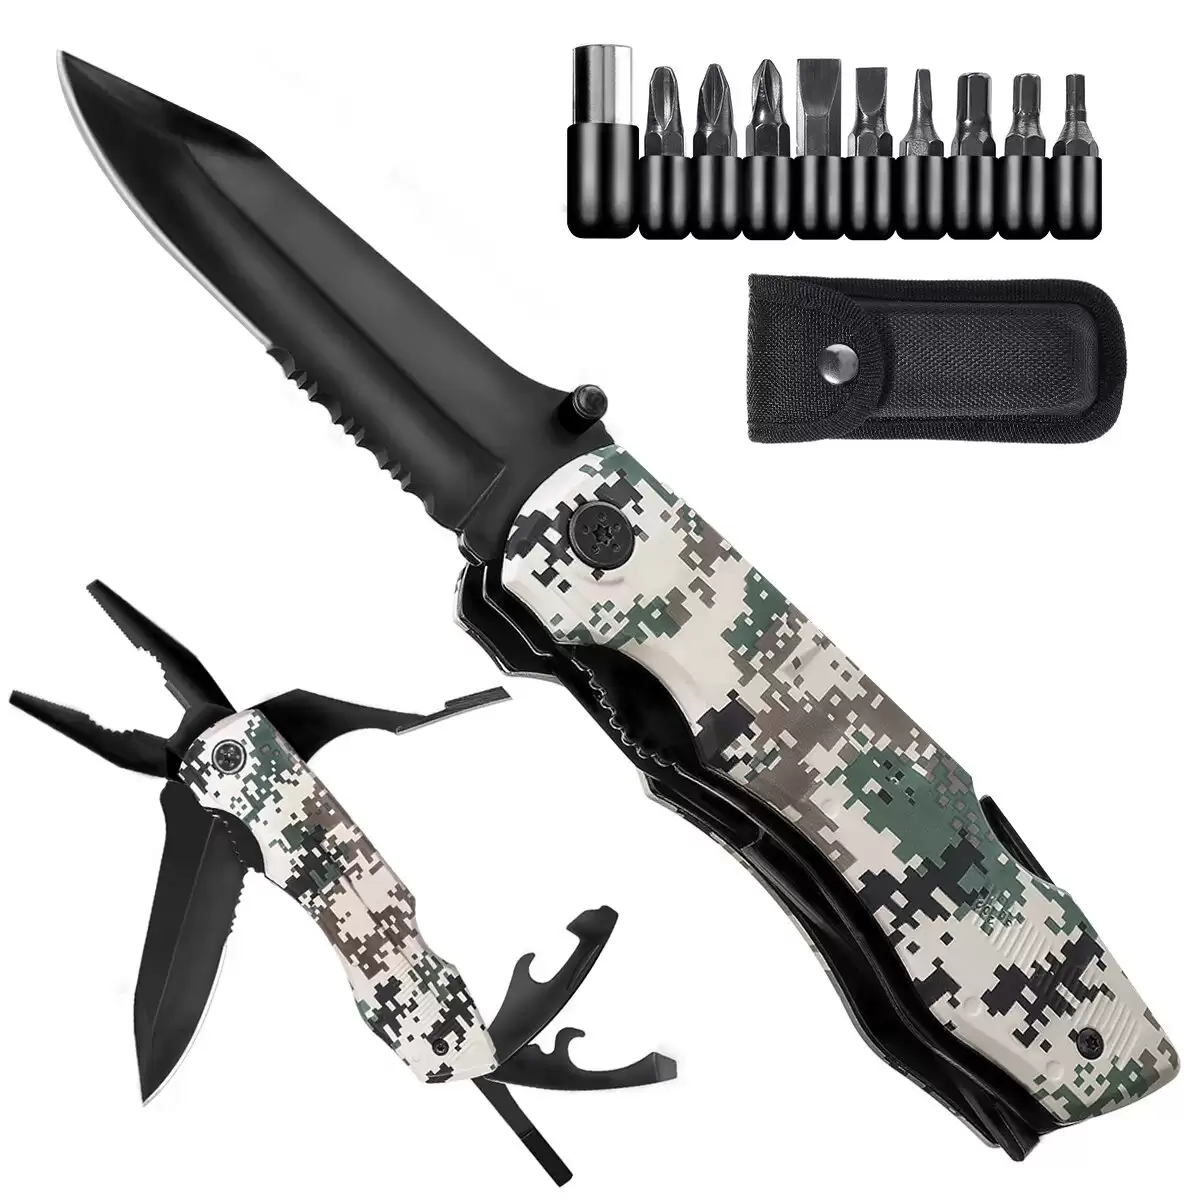 Order In Just $11.99 [enhance Version] Ghk-mk92 13 In 1 Multifunctional Camouflage Tools Folding Outdoor Tool Kitchen Bottle Opener Sharp Pocket Multitool Knife Pliers Saw Blade Cutter Screwdriver Tools With This Coupon At Banggood